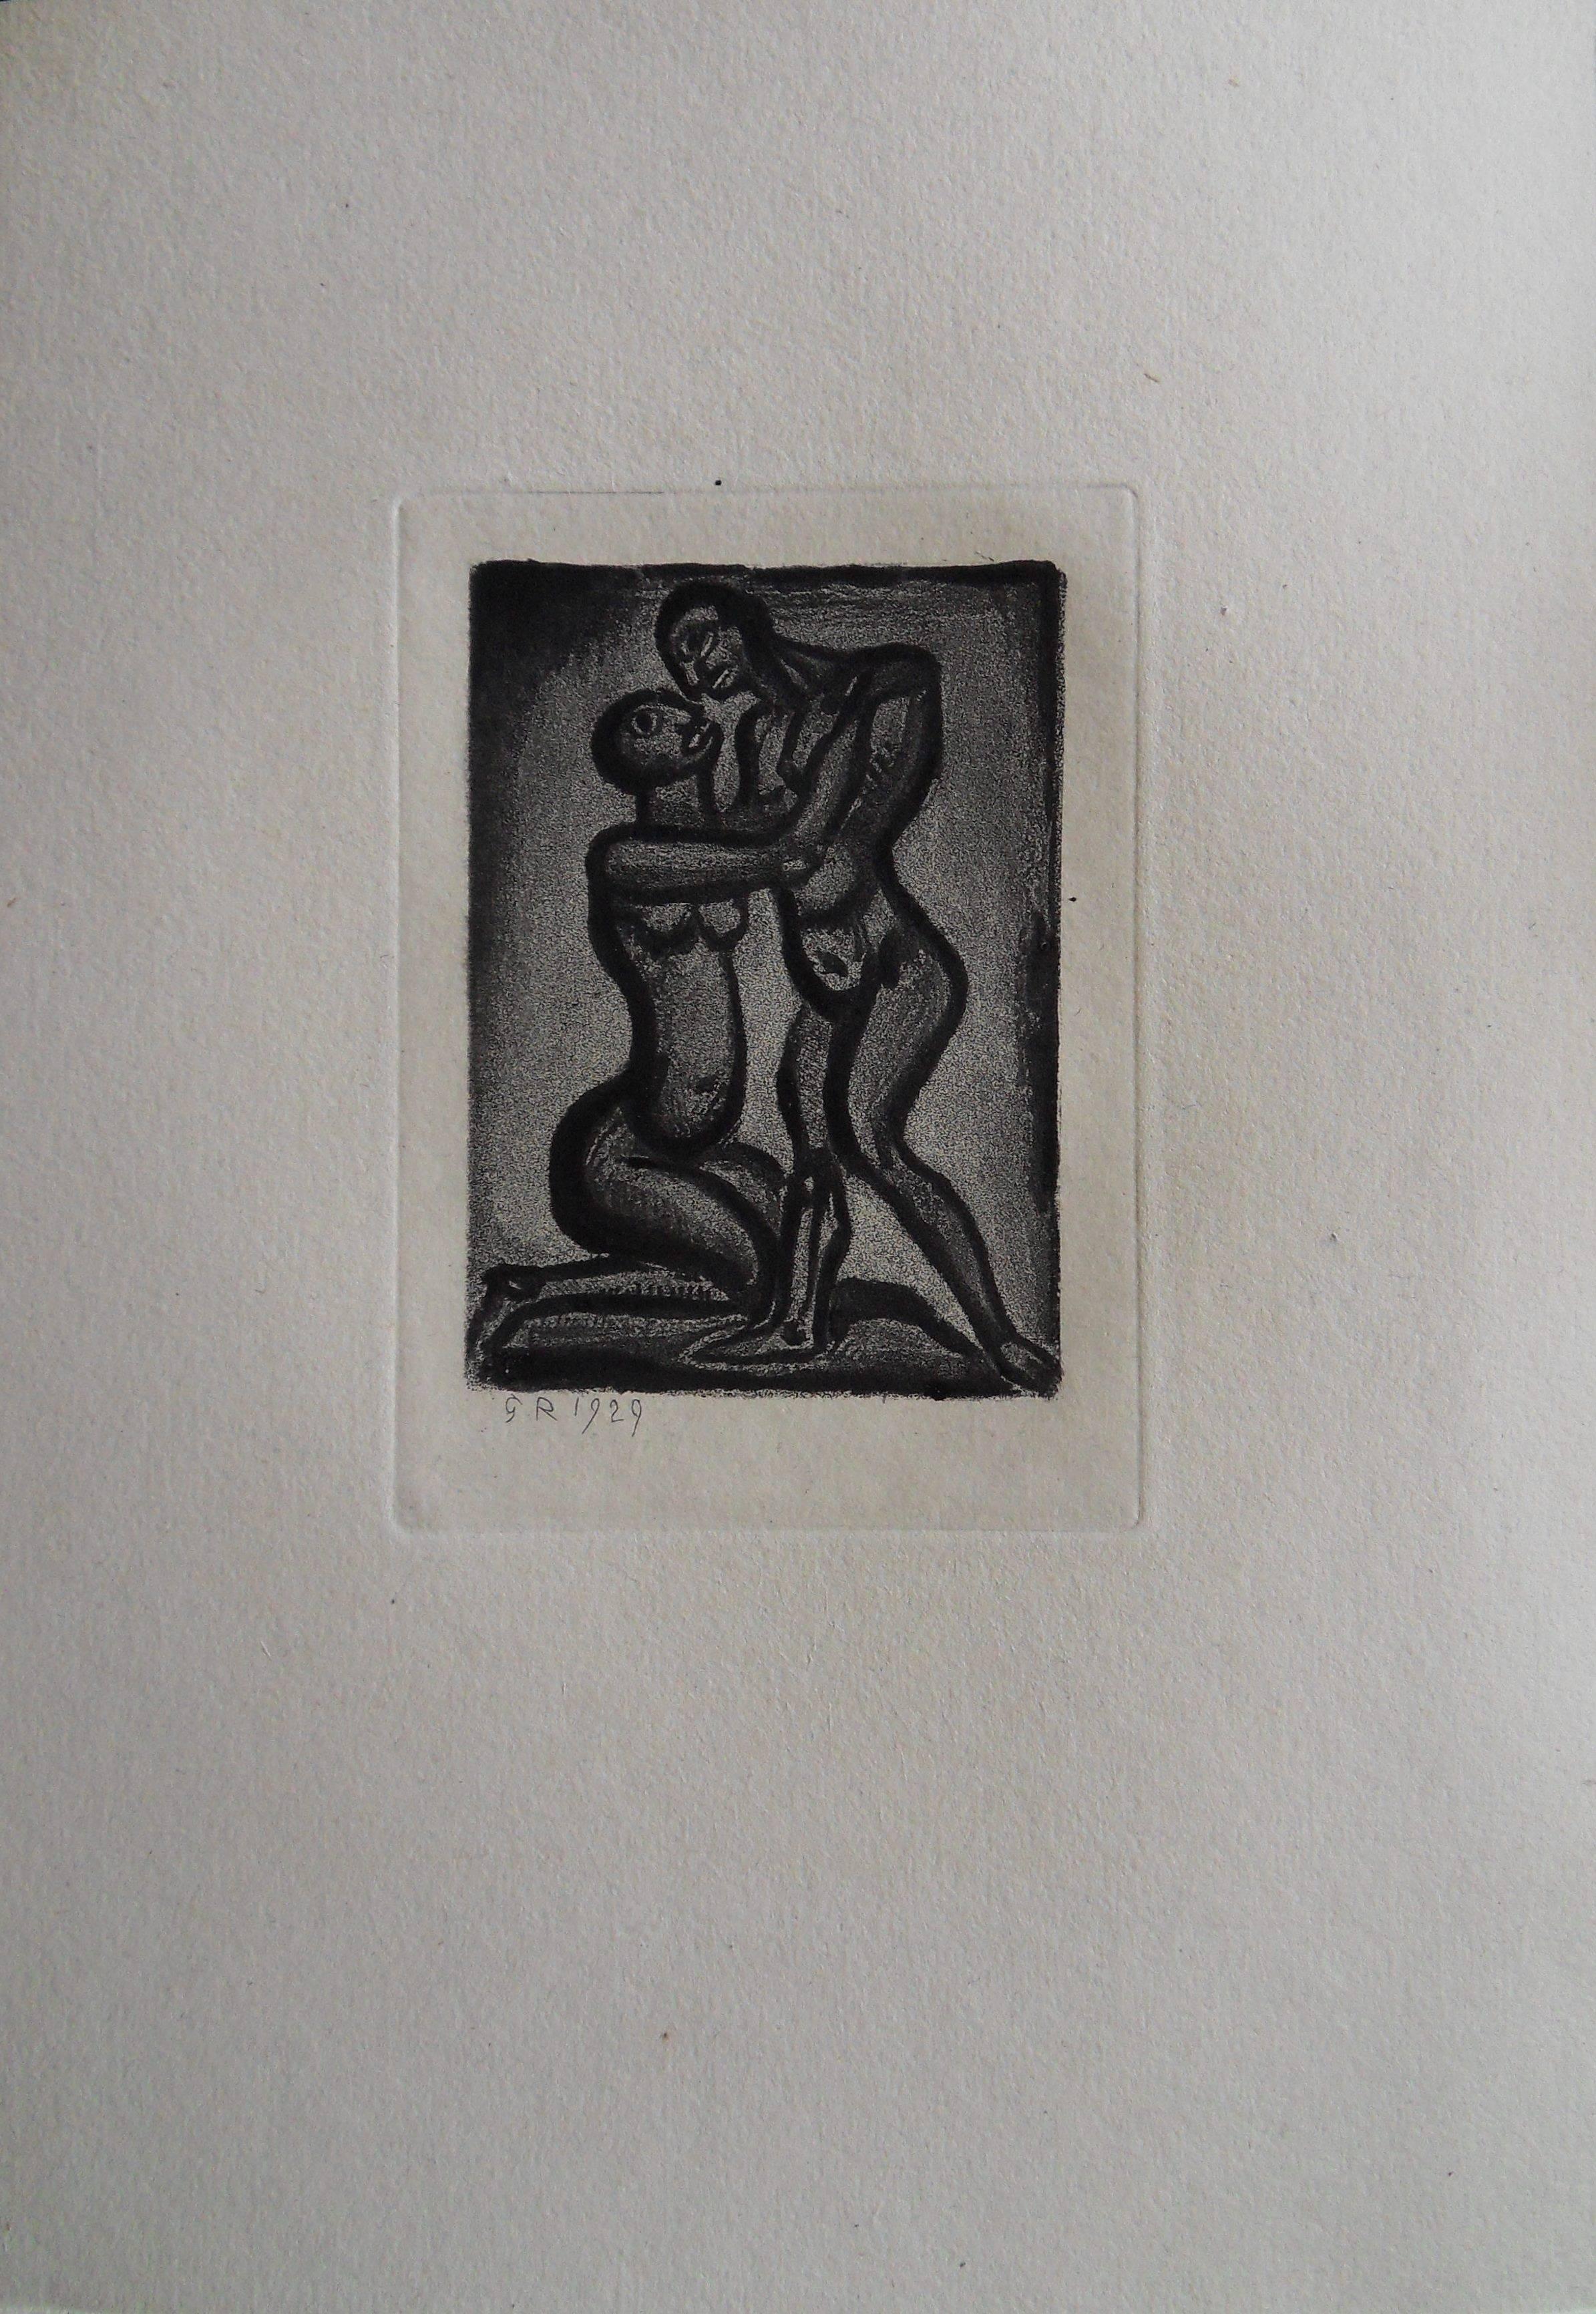 Couple Hugging - Original etching - 1929 - Realist Print by Georges Rouault